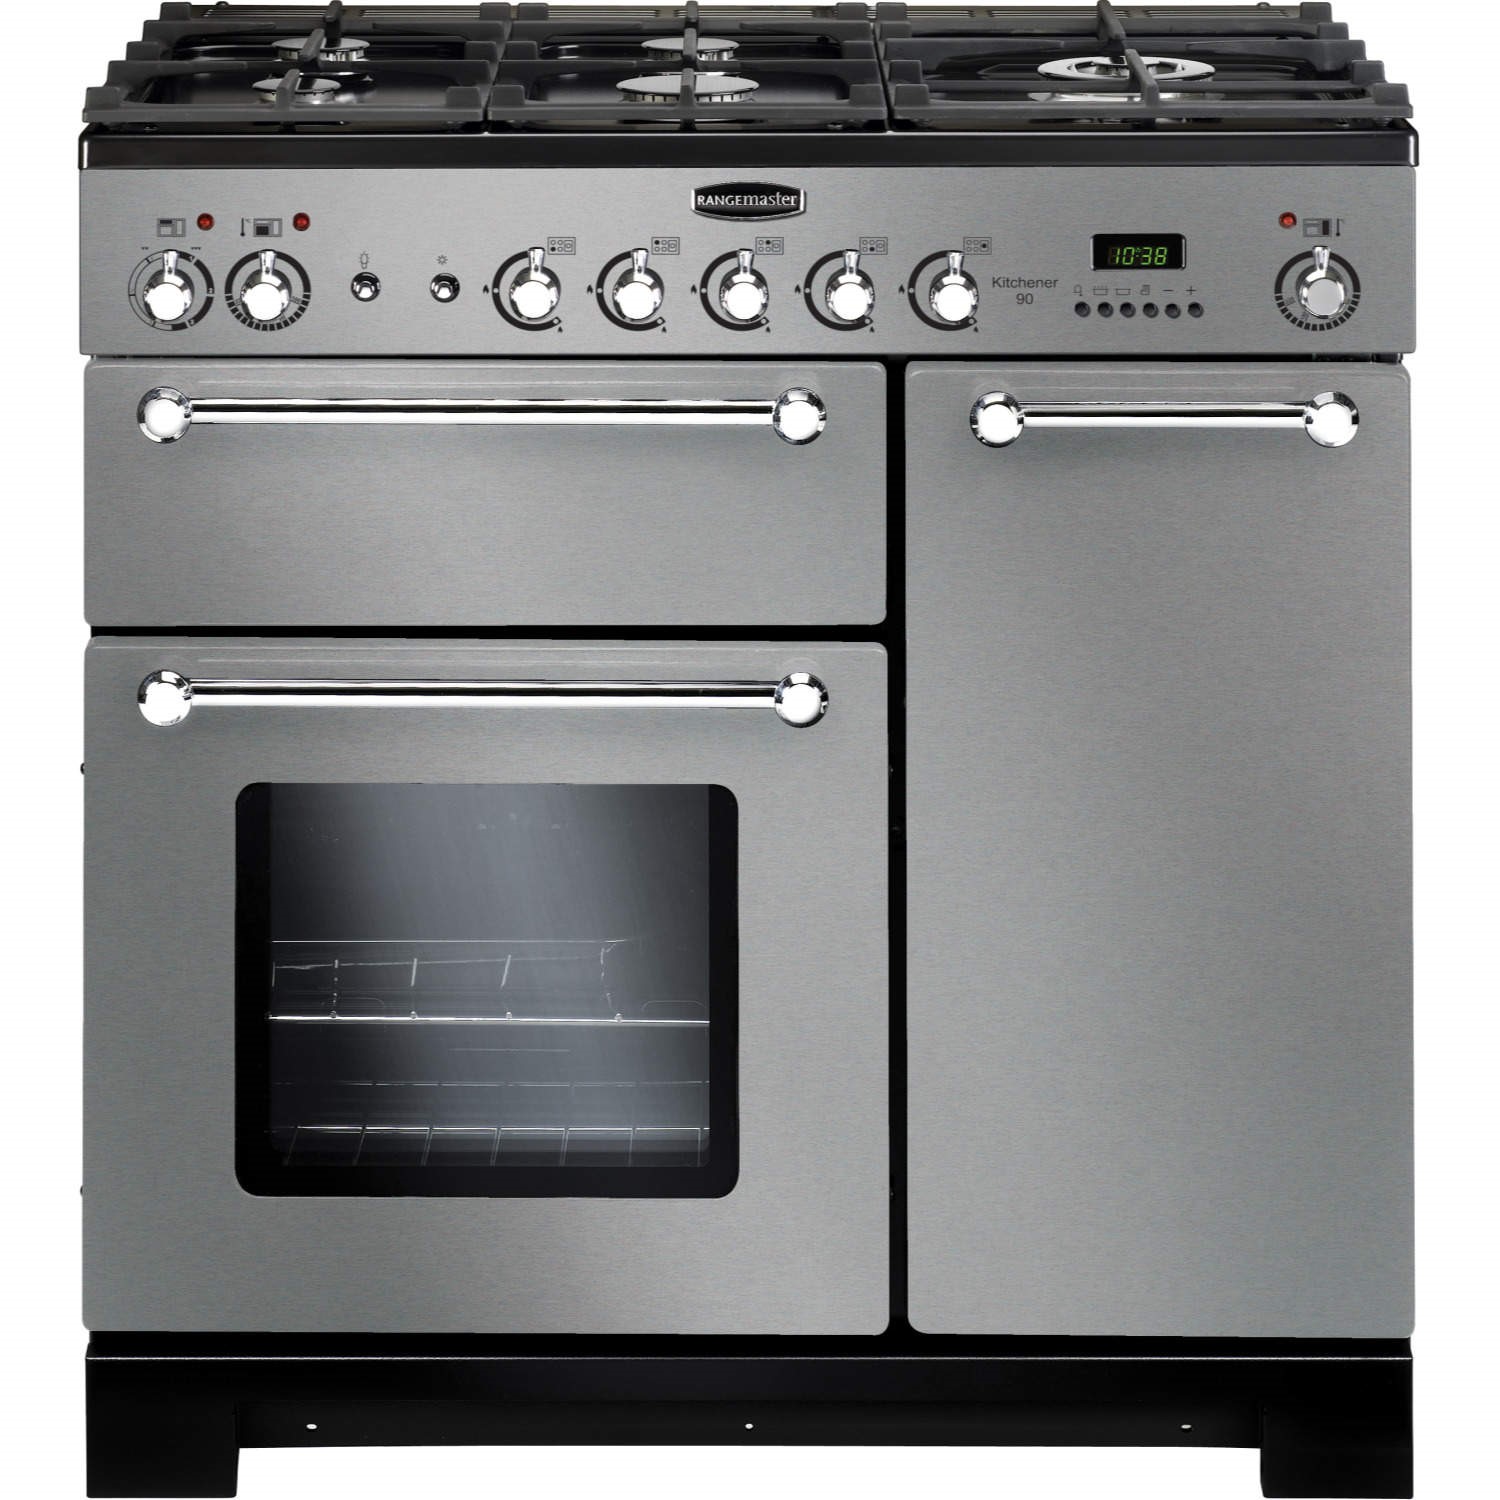 Rangemaster Kitchener KCH90DFFSS/C 90cm Dual Fuel Range Cooker - Stainless Steel / Chrome - A/A Rated